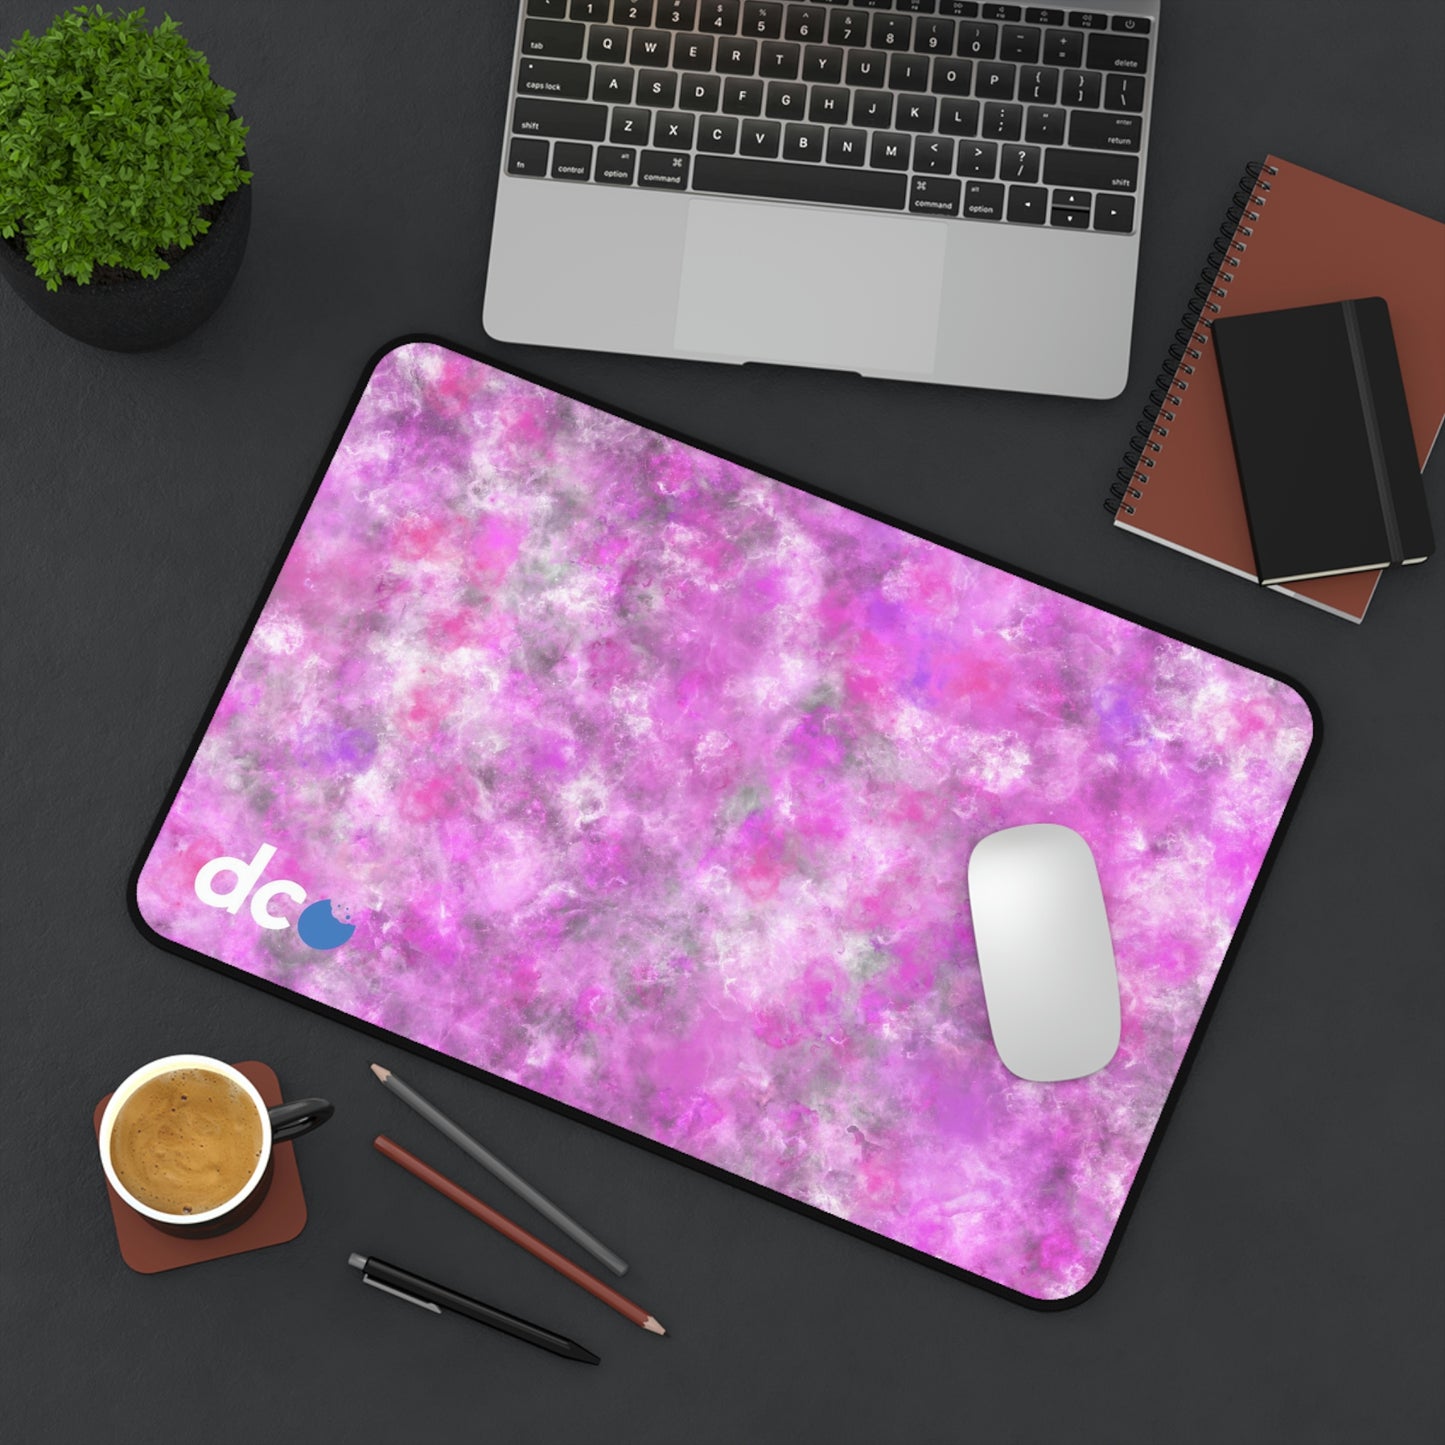 A 12" x 18" desk mat with a fluffy mix of pink, white, and gray sitting at an angle.